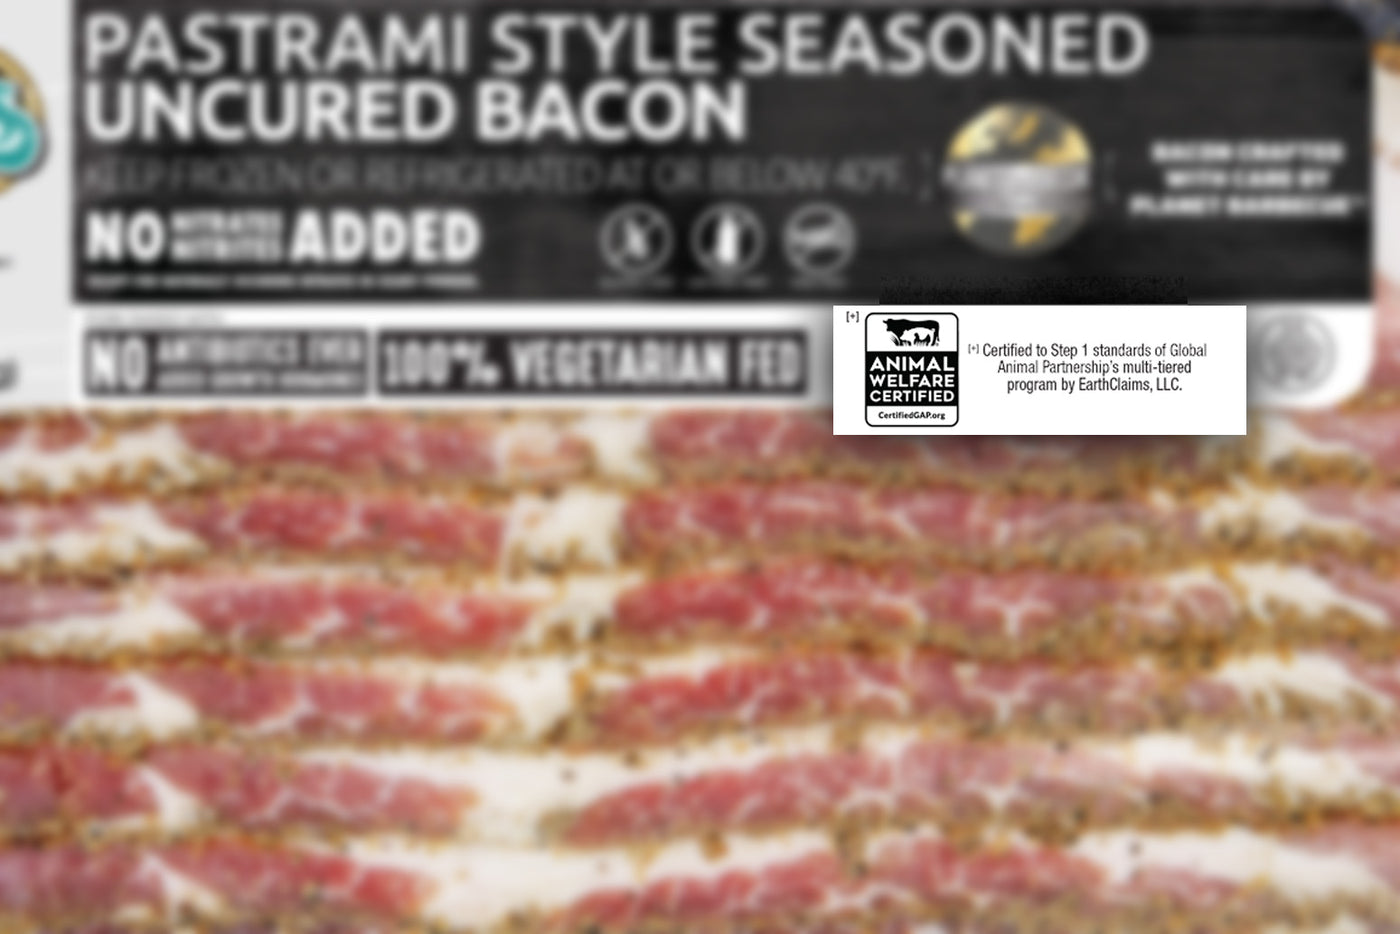 A closeup of a package of Pederson's Farms Bacon. The GAP Animal Welfare Certification logo is enlarged and featured while the rest of the package is blurred.